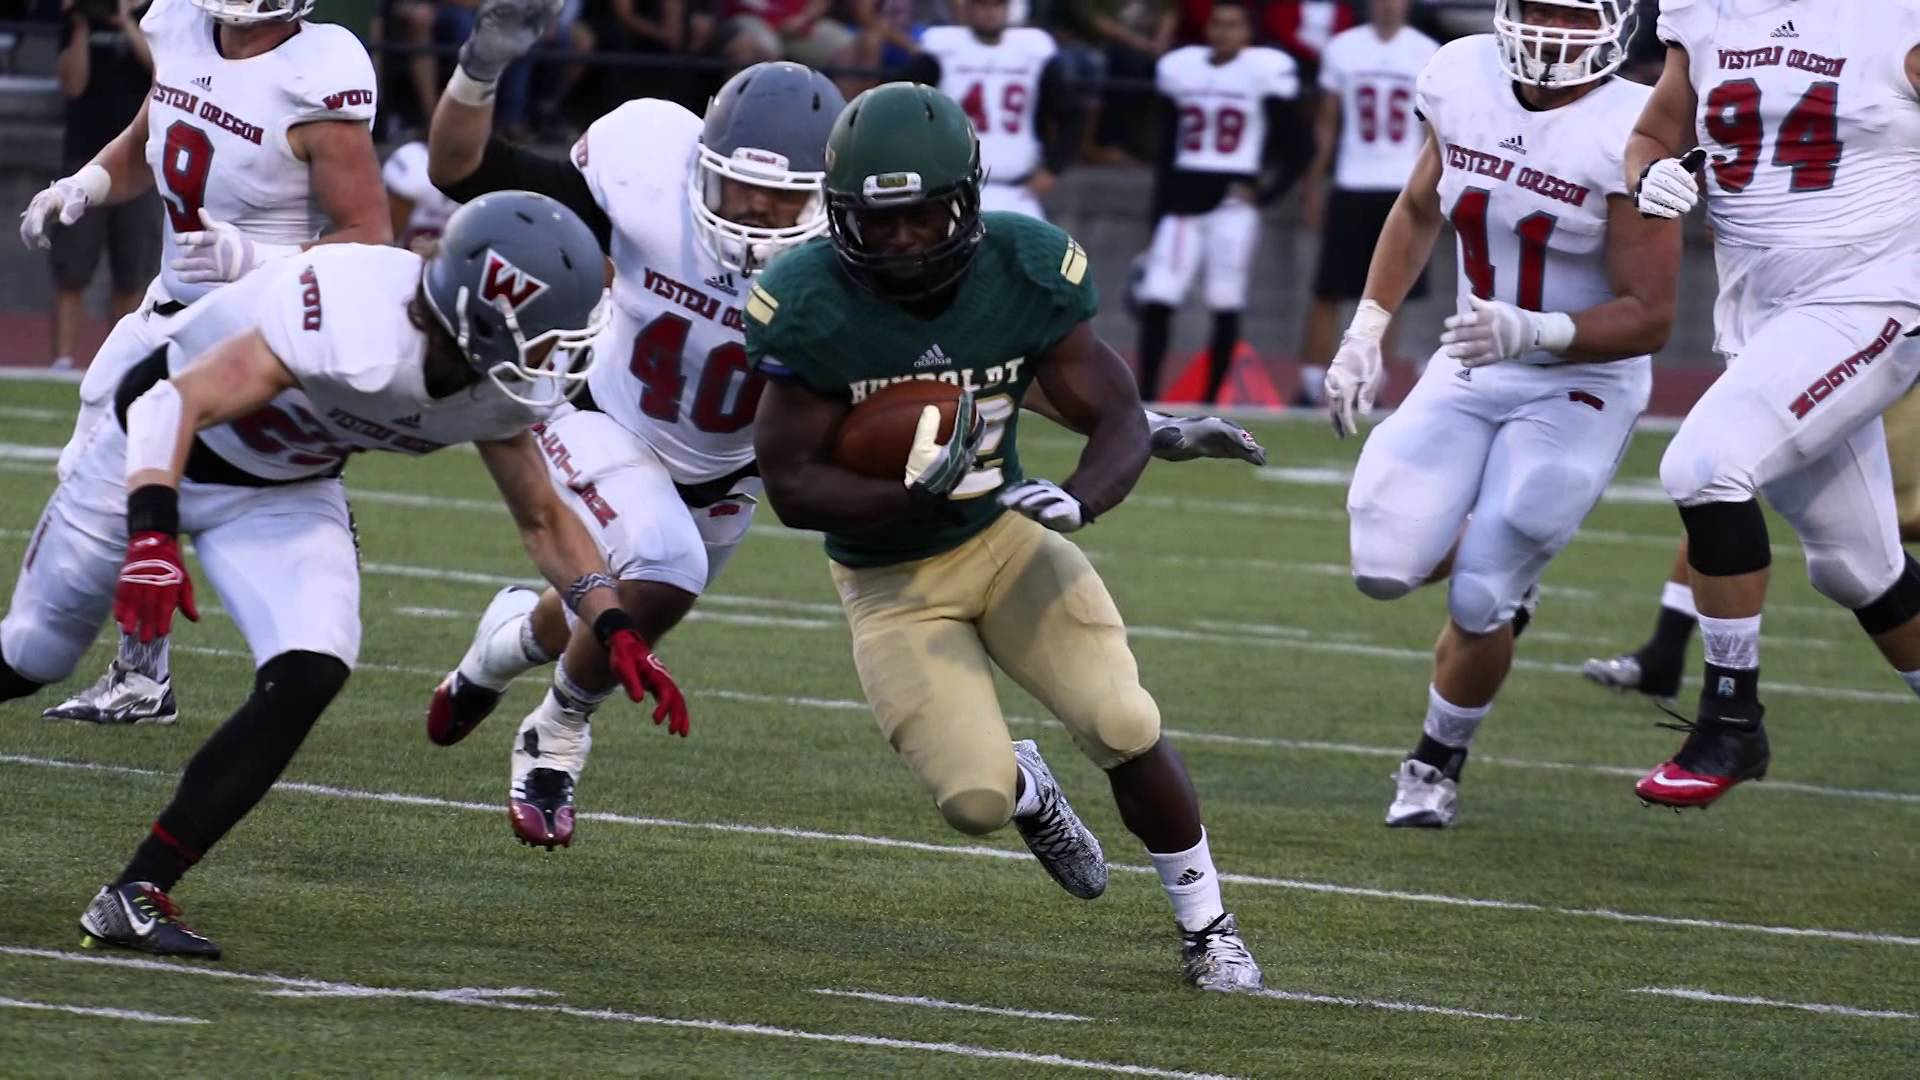 Better Know The Opponent, Week 1: Humboldt State